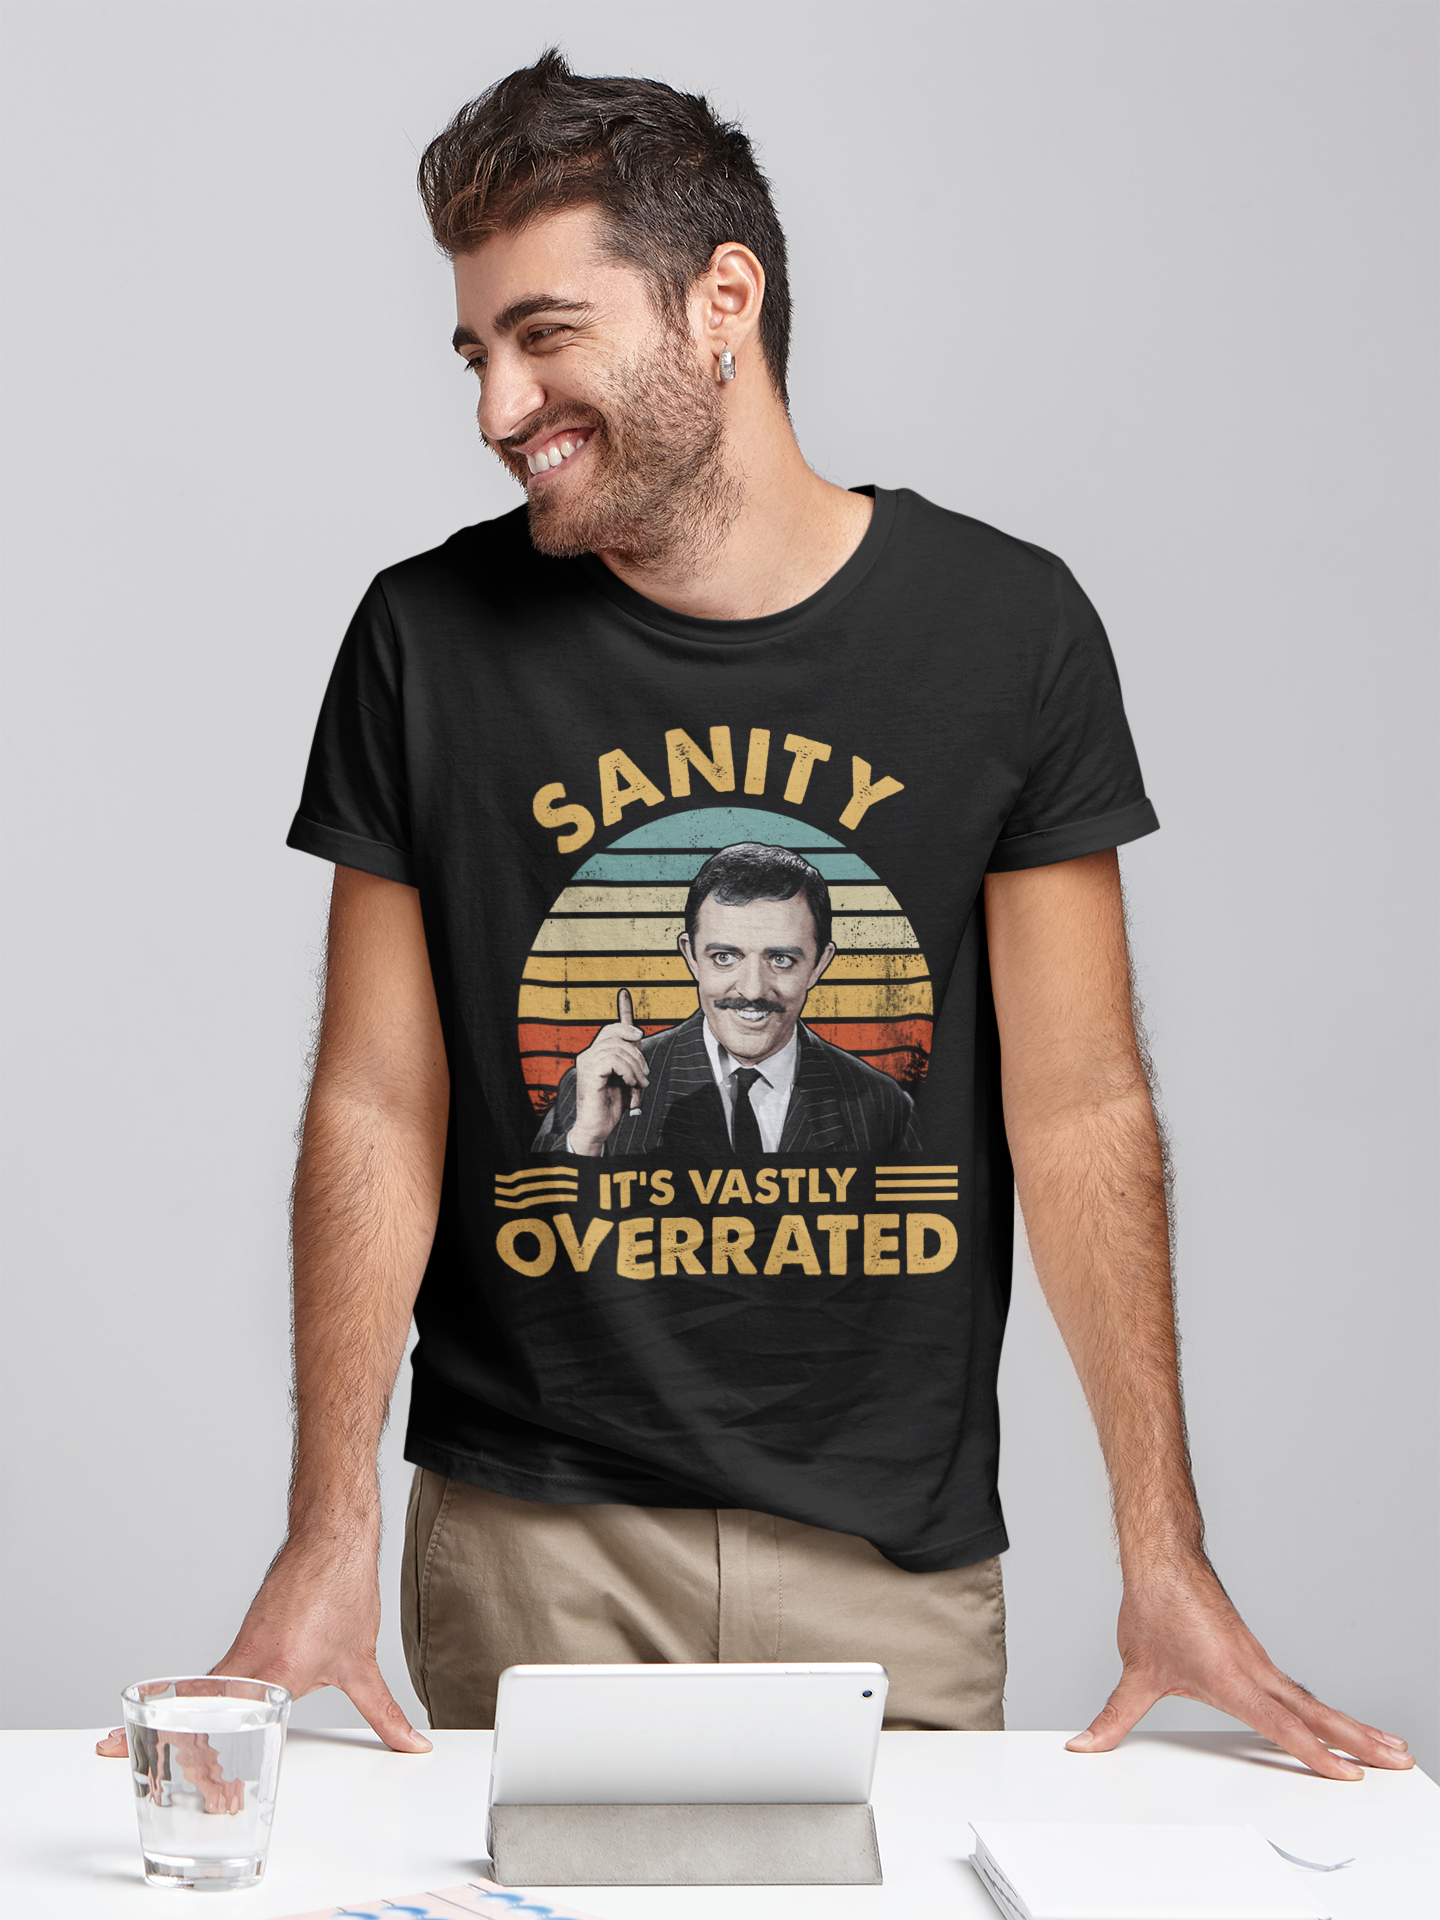 Addams Family Vintage T Shirt, Gomez Addams Tshirt, Sanity Its Vastly Overrated Shirt, Halloween Gifts